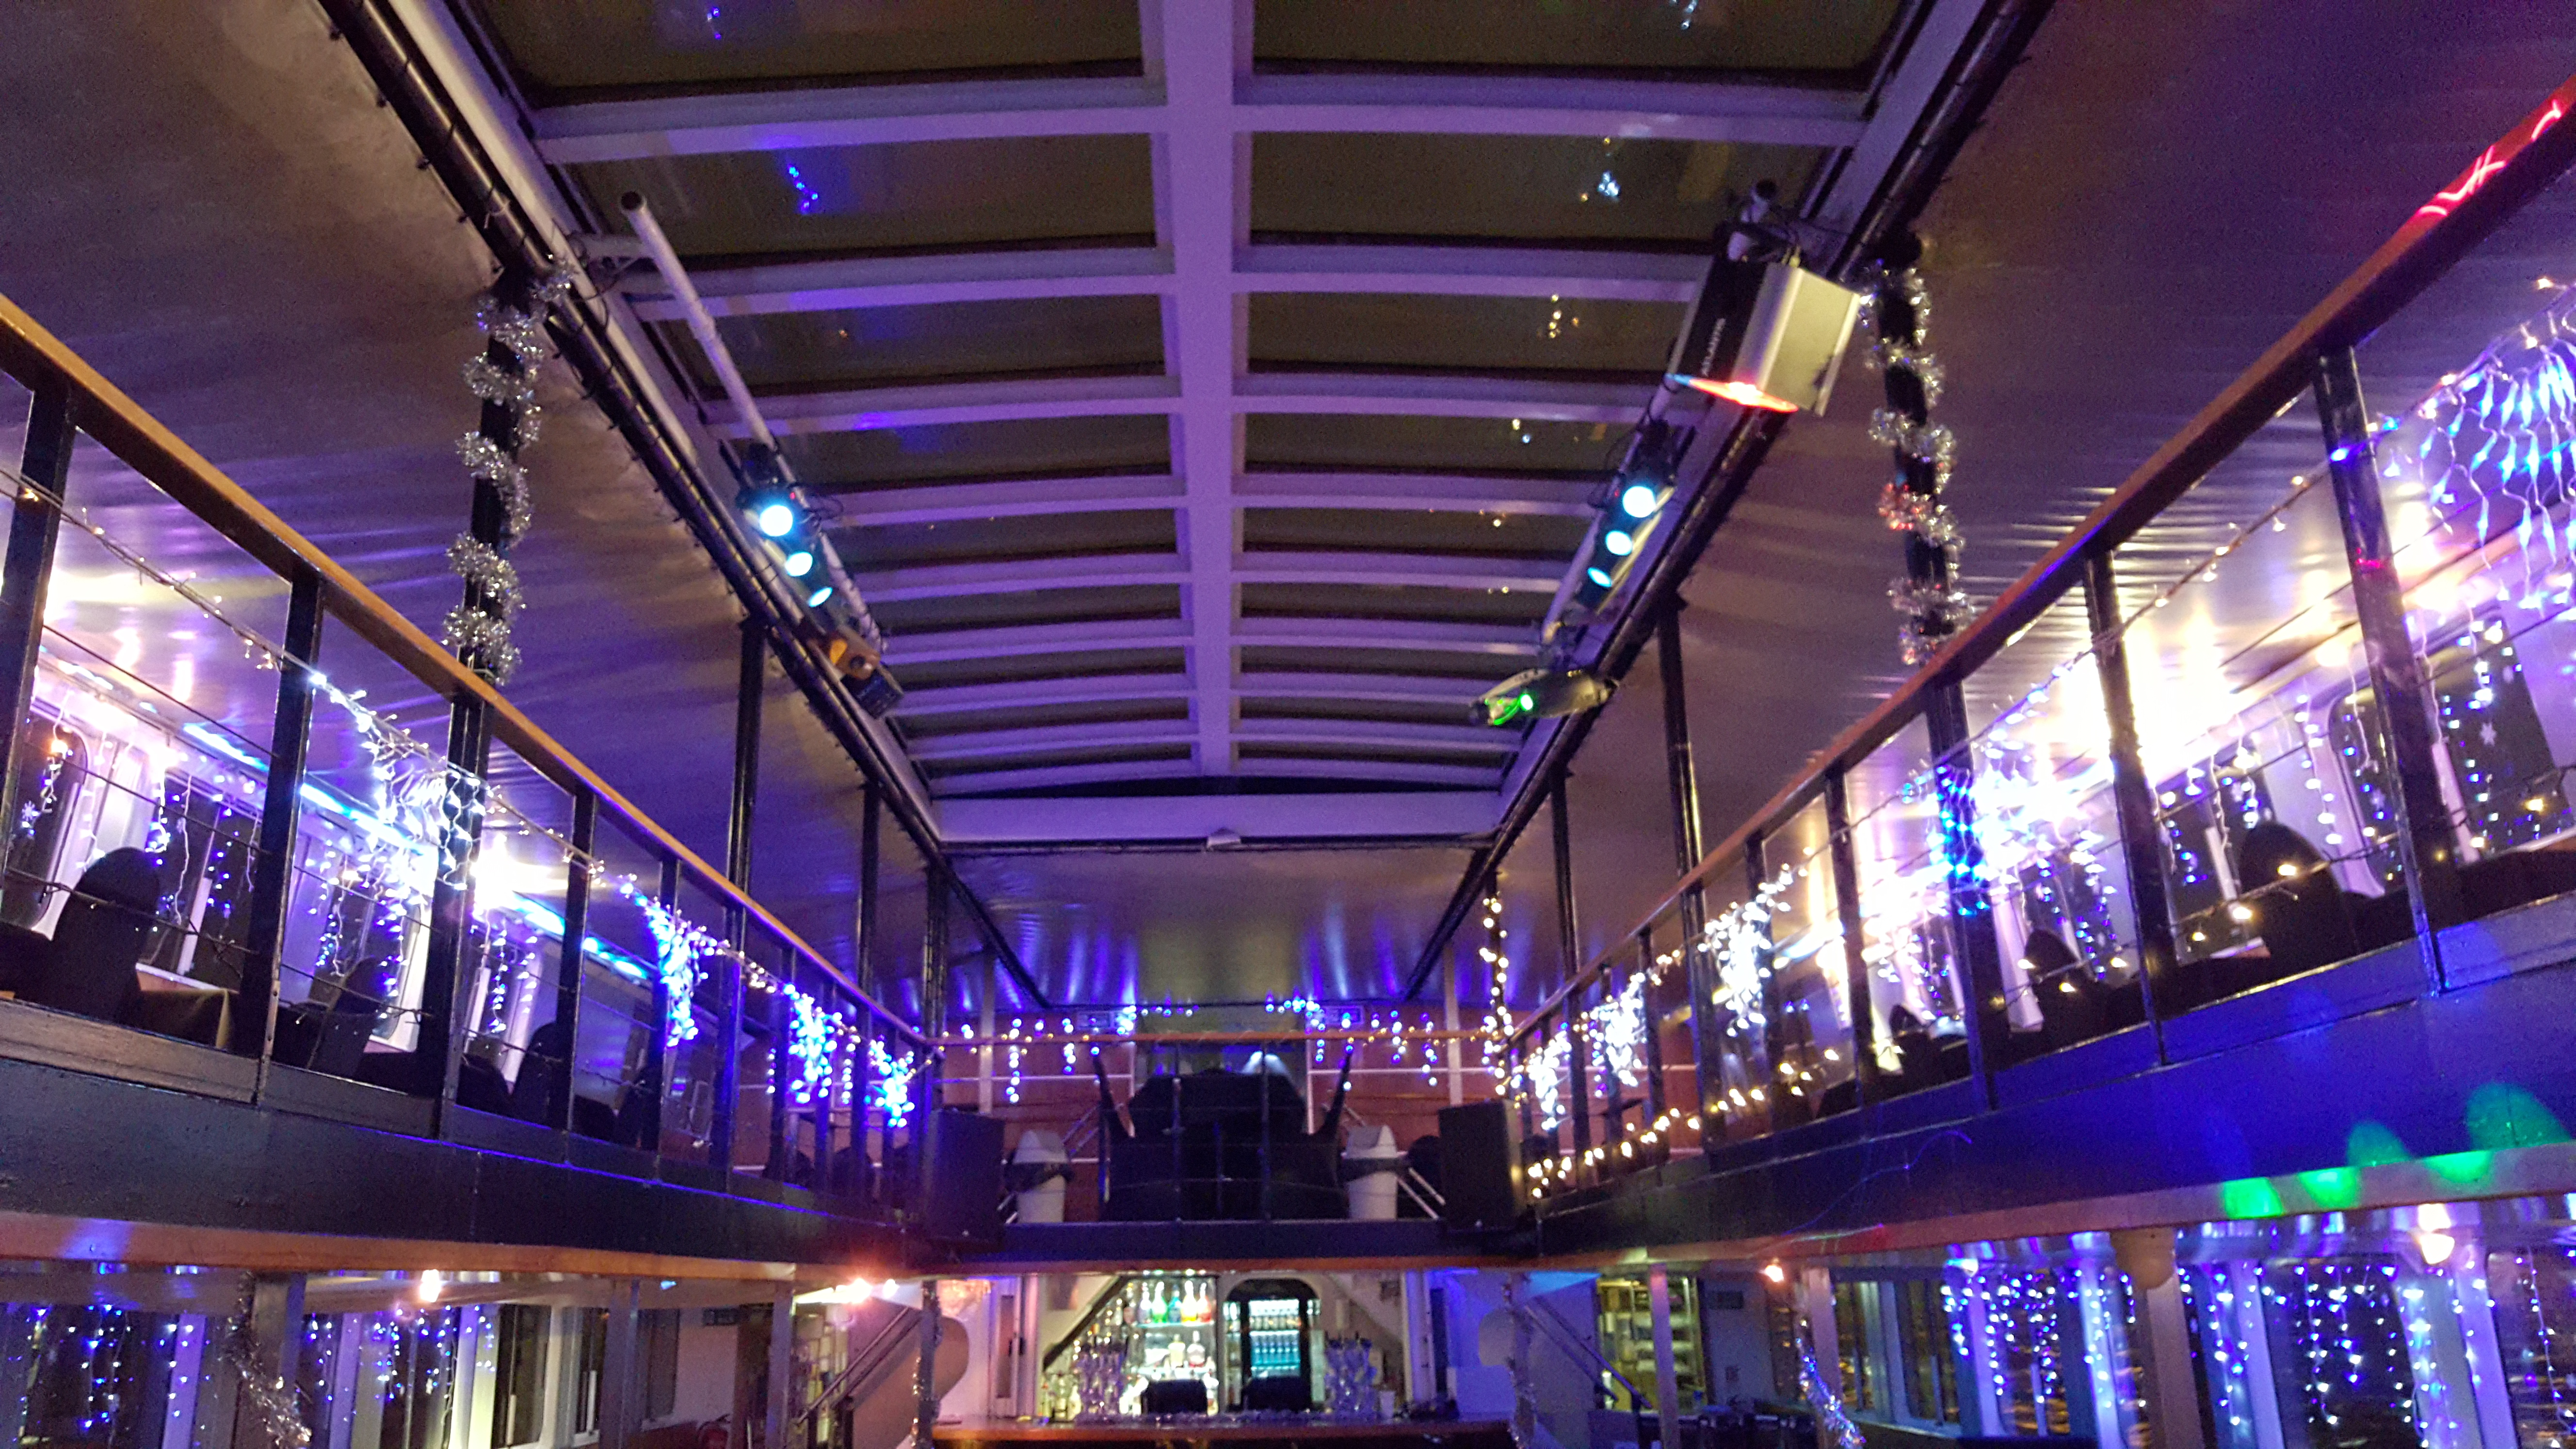 Enjoy incredible views of London's New Year's Eve fireworks through the Jewel of London's retractable glass sun roof.